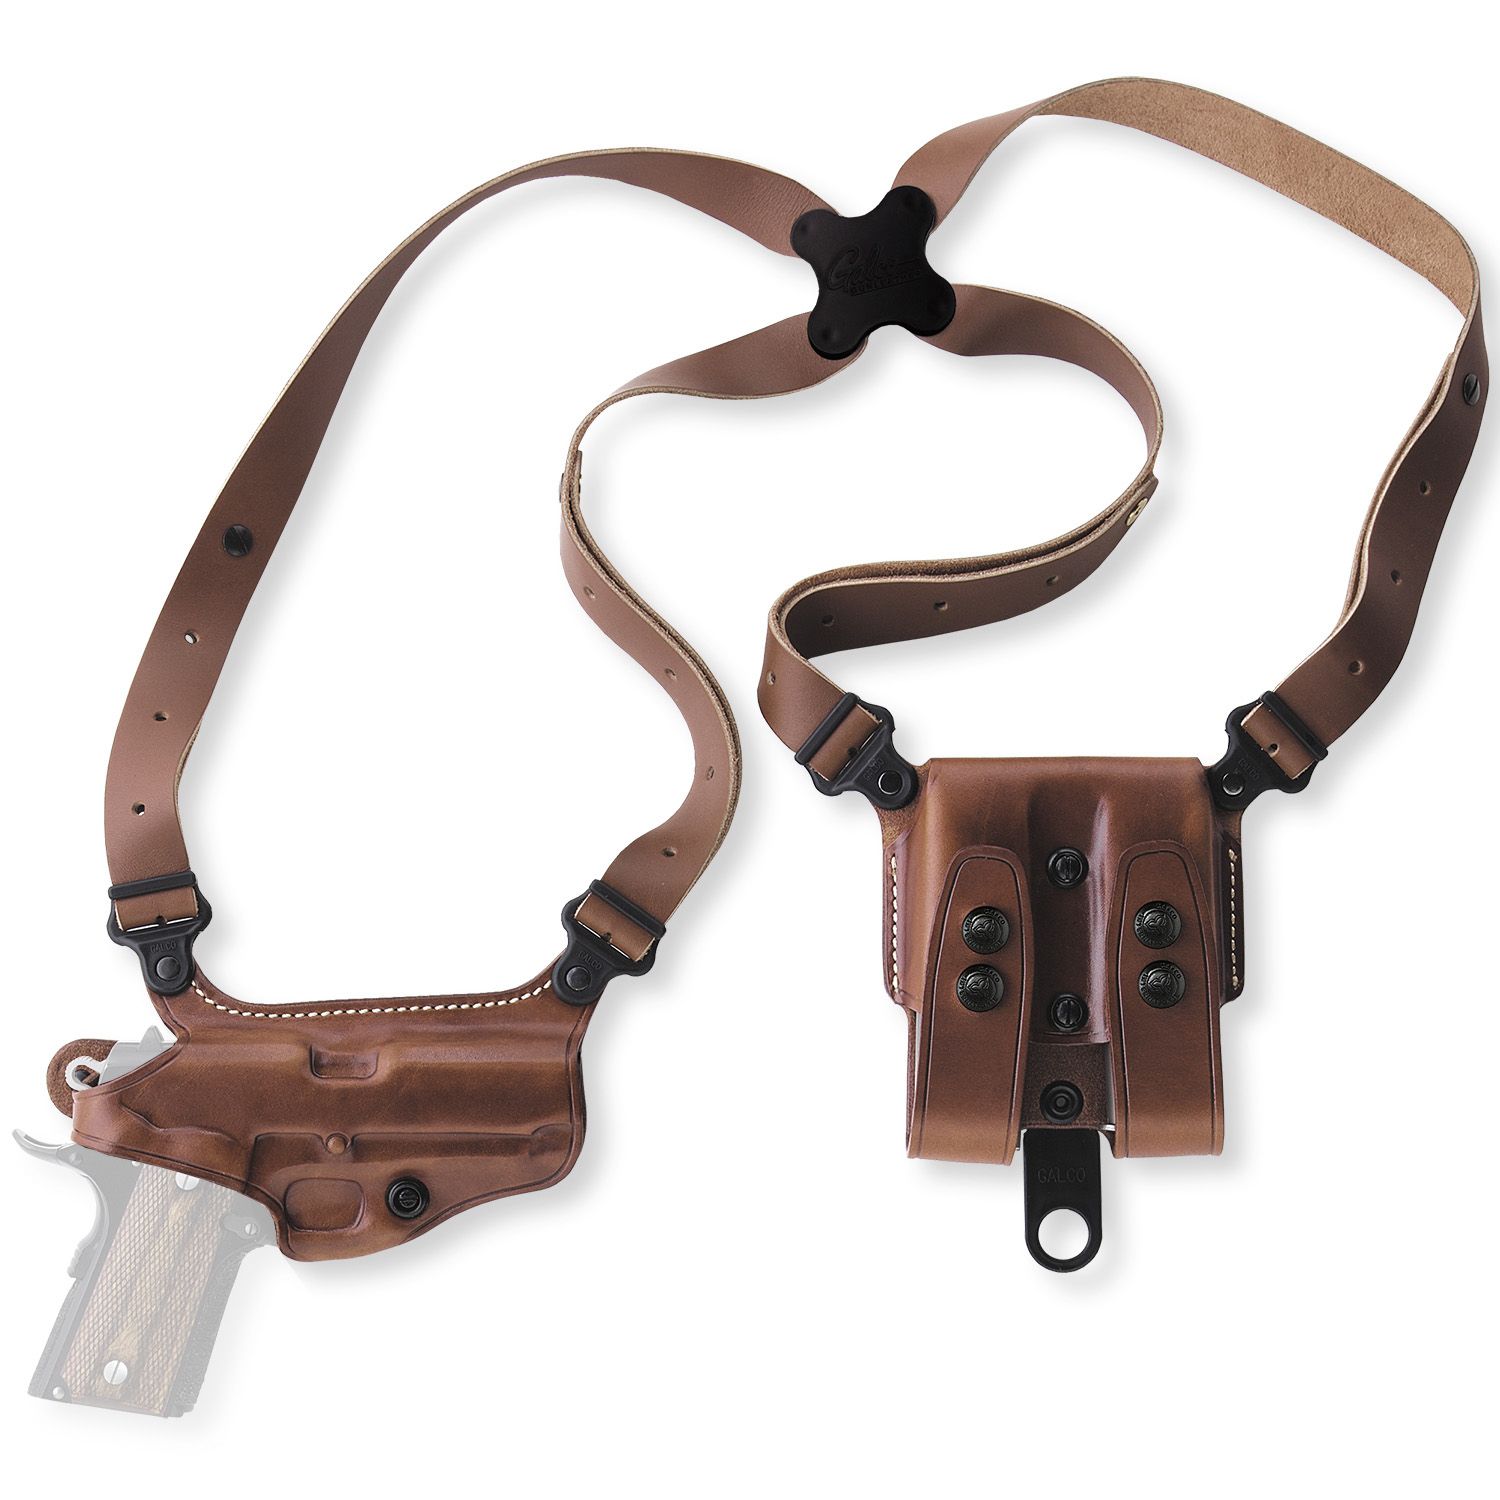 Galco Miami Classic Shoulder Handgun System Leather Holster Left Hand : MC473